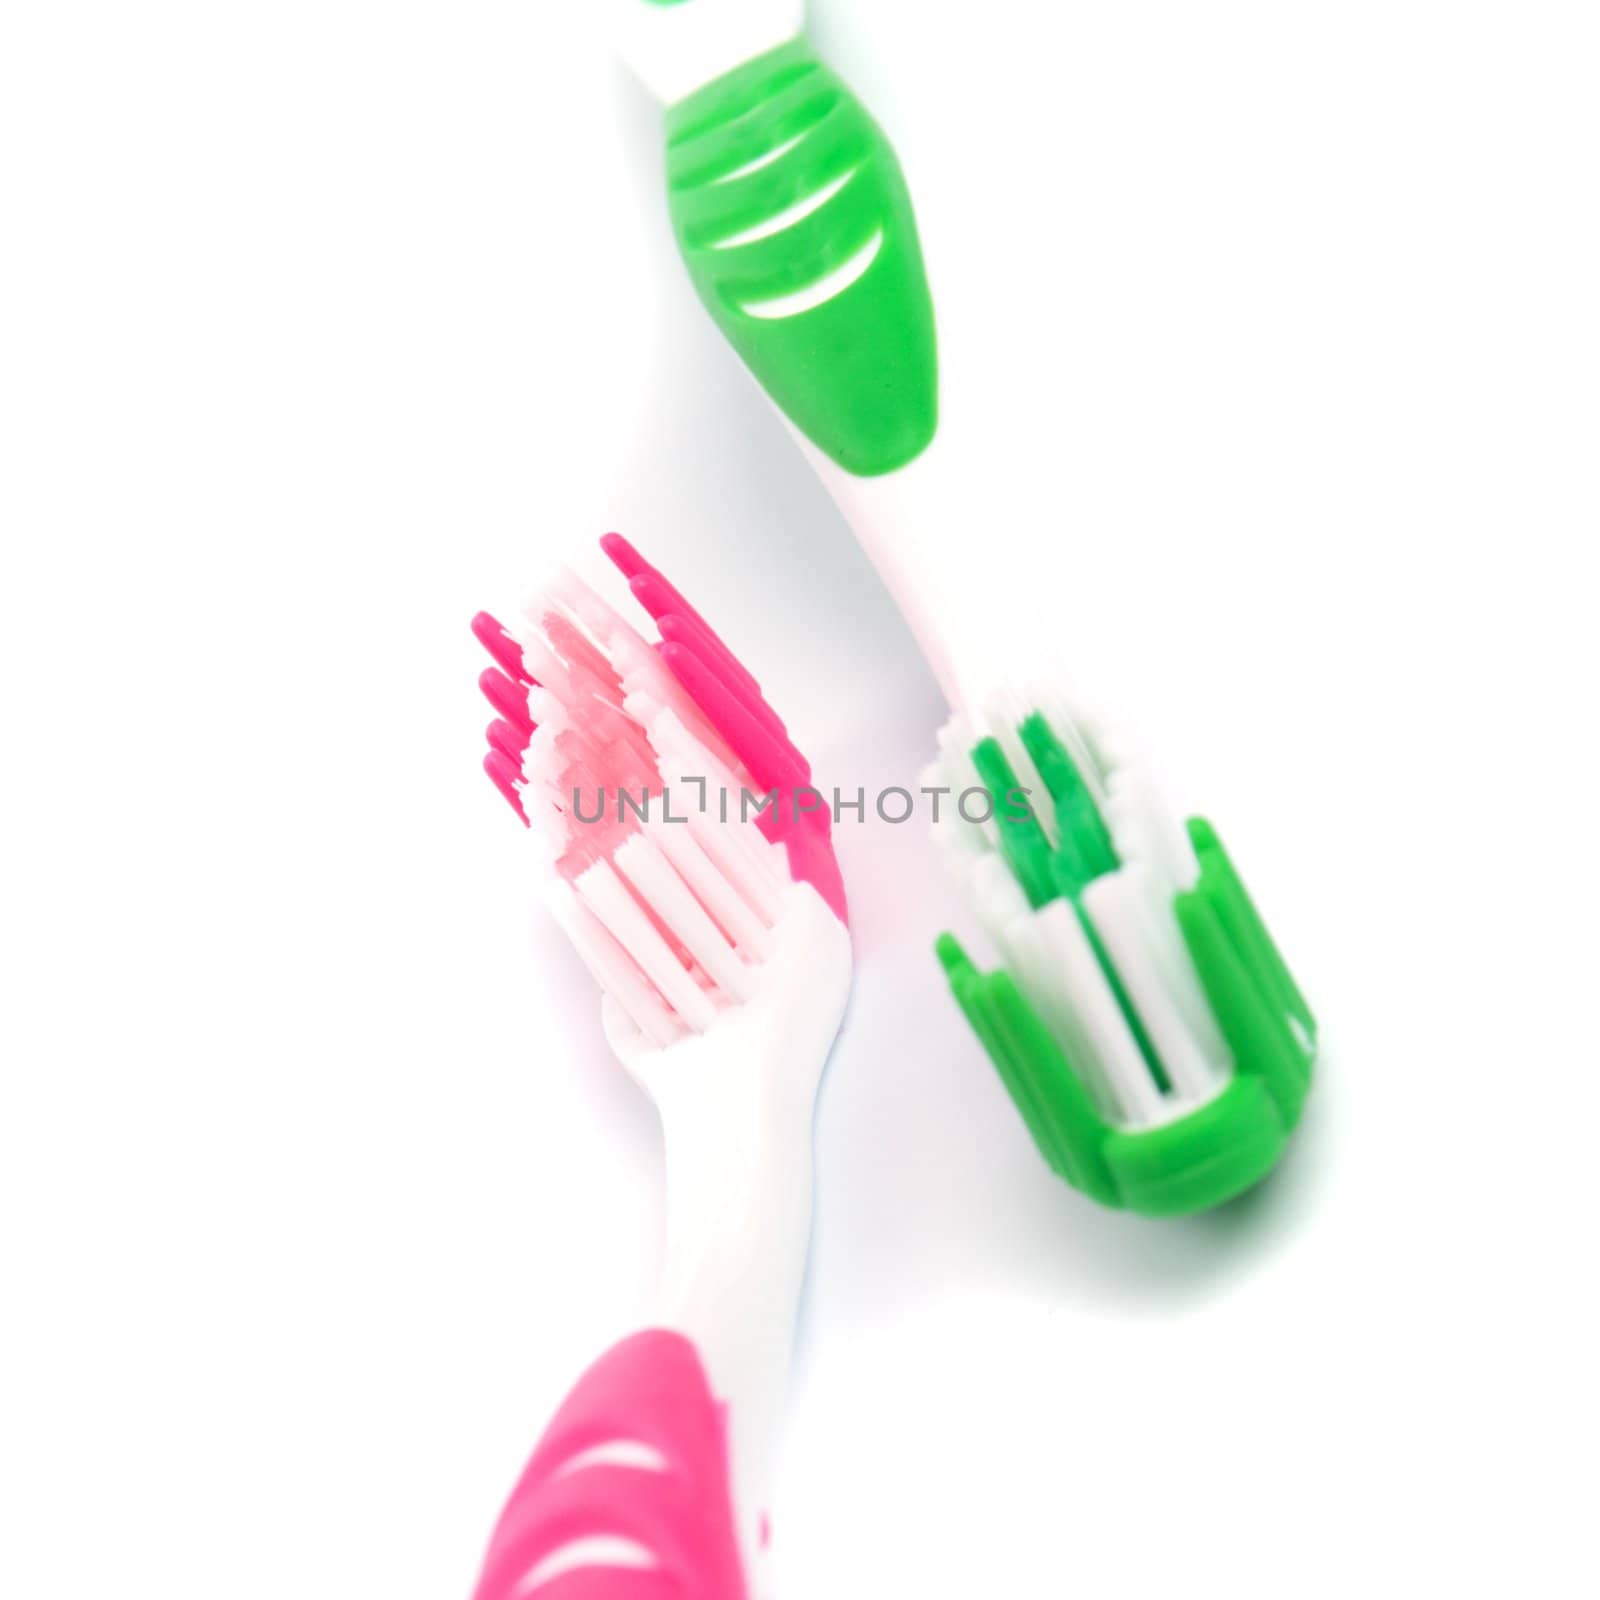 two toothbrushes by marylooo